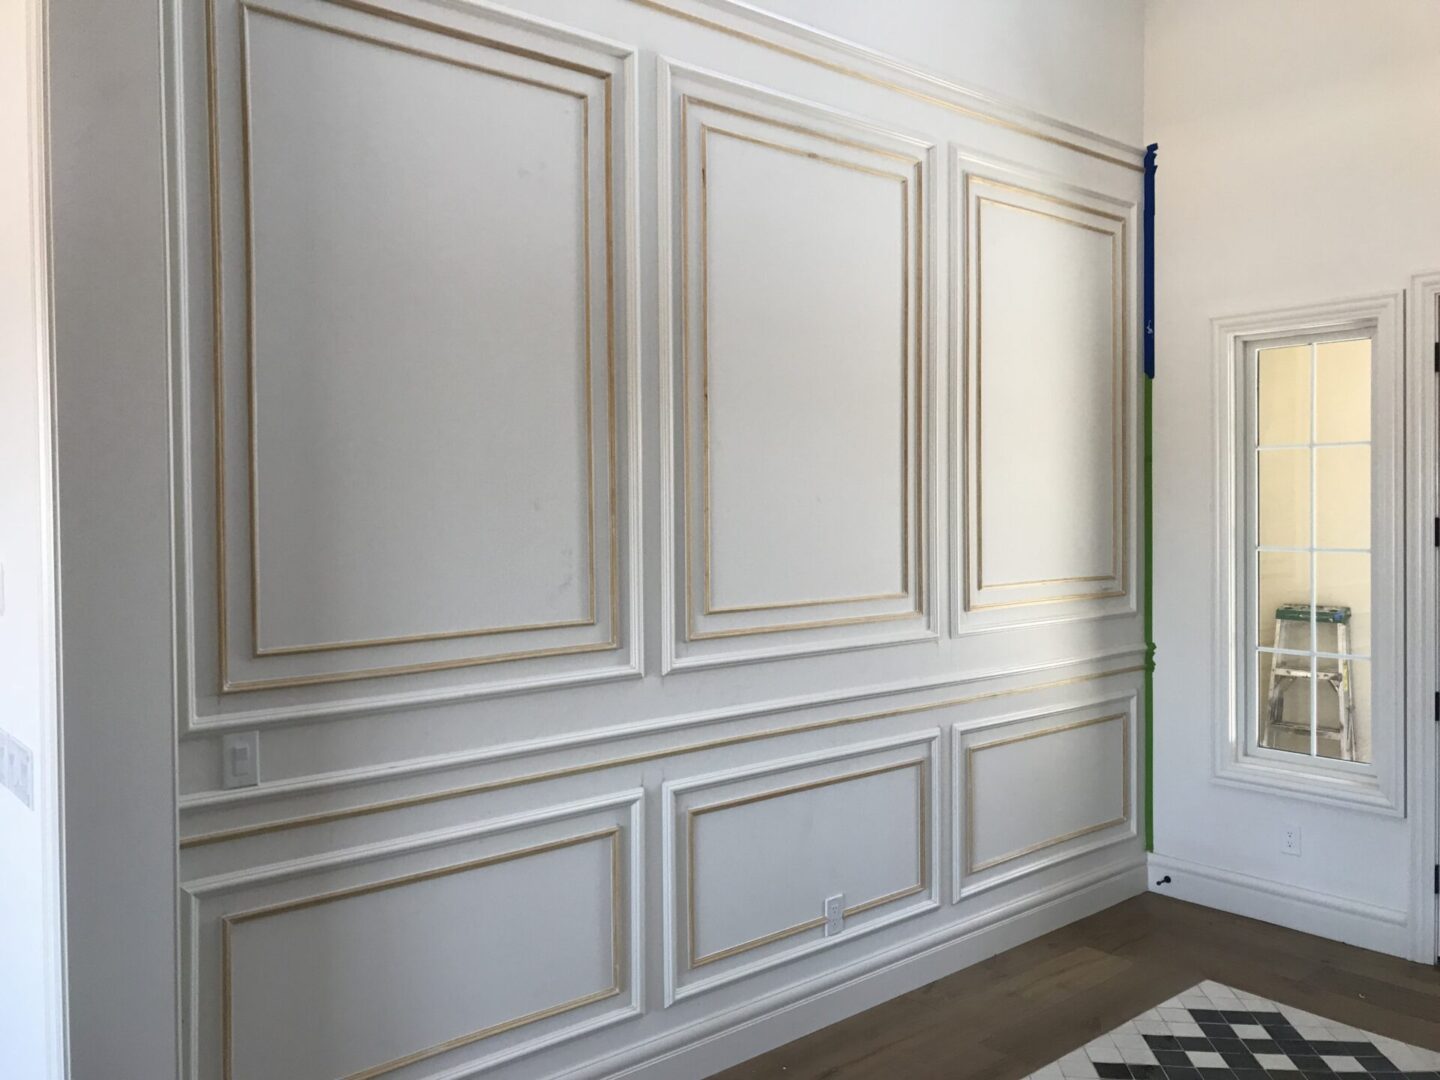 A white wall with some wood trim on it